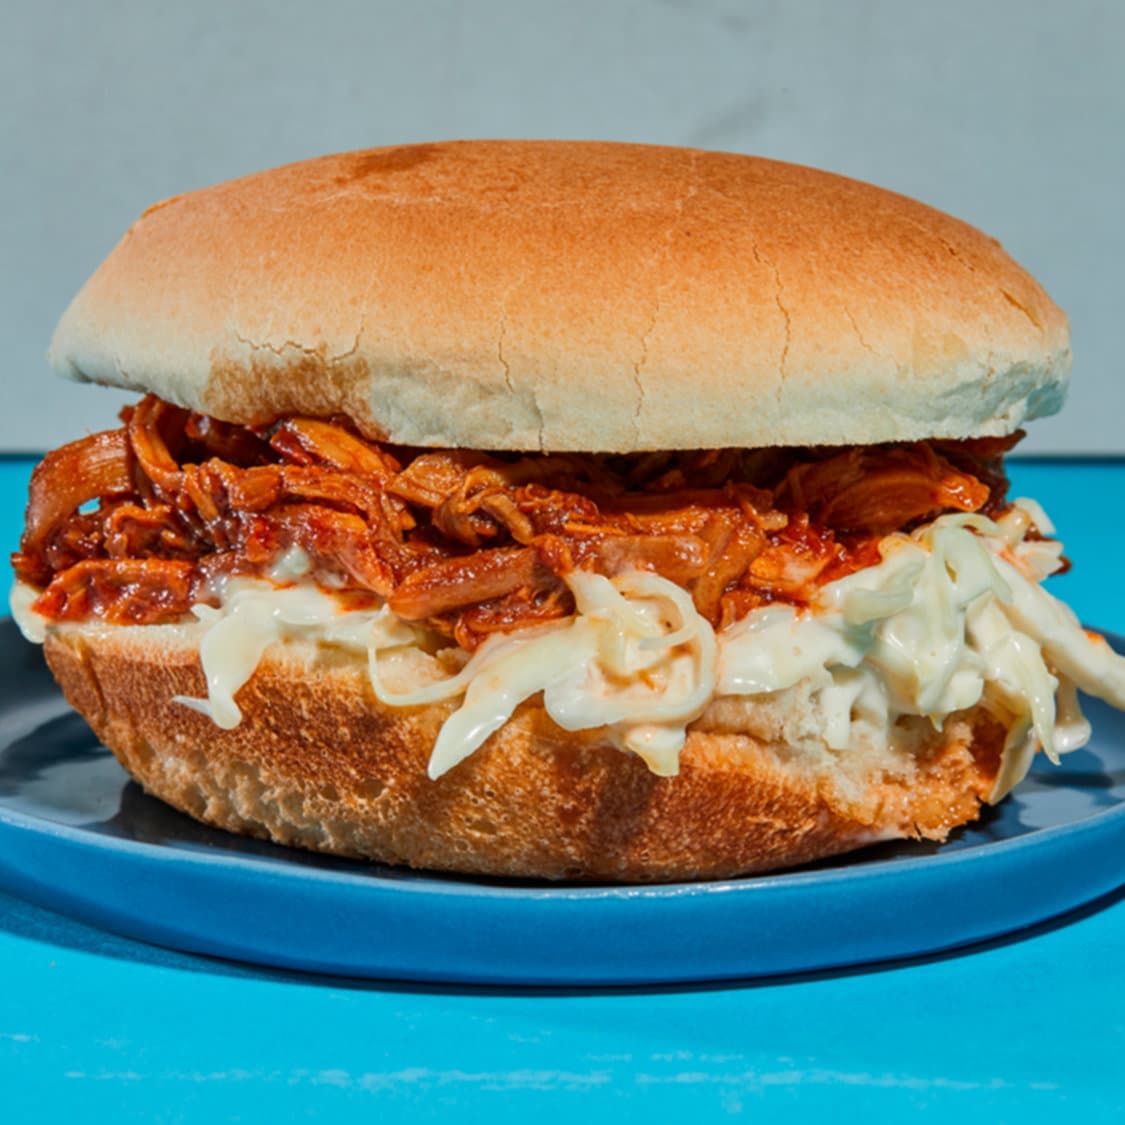 https://fleishigs.com/images/mobile-app/recipes/1486-list-spicy-pulled-chicken-sandwiches.jpg